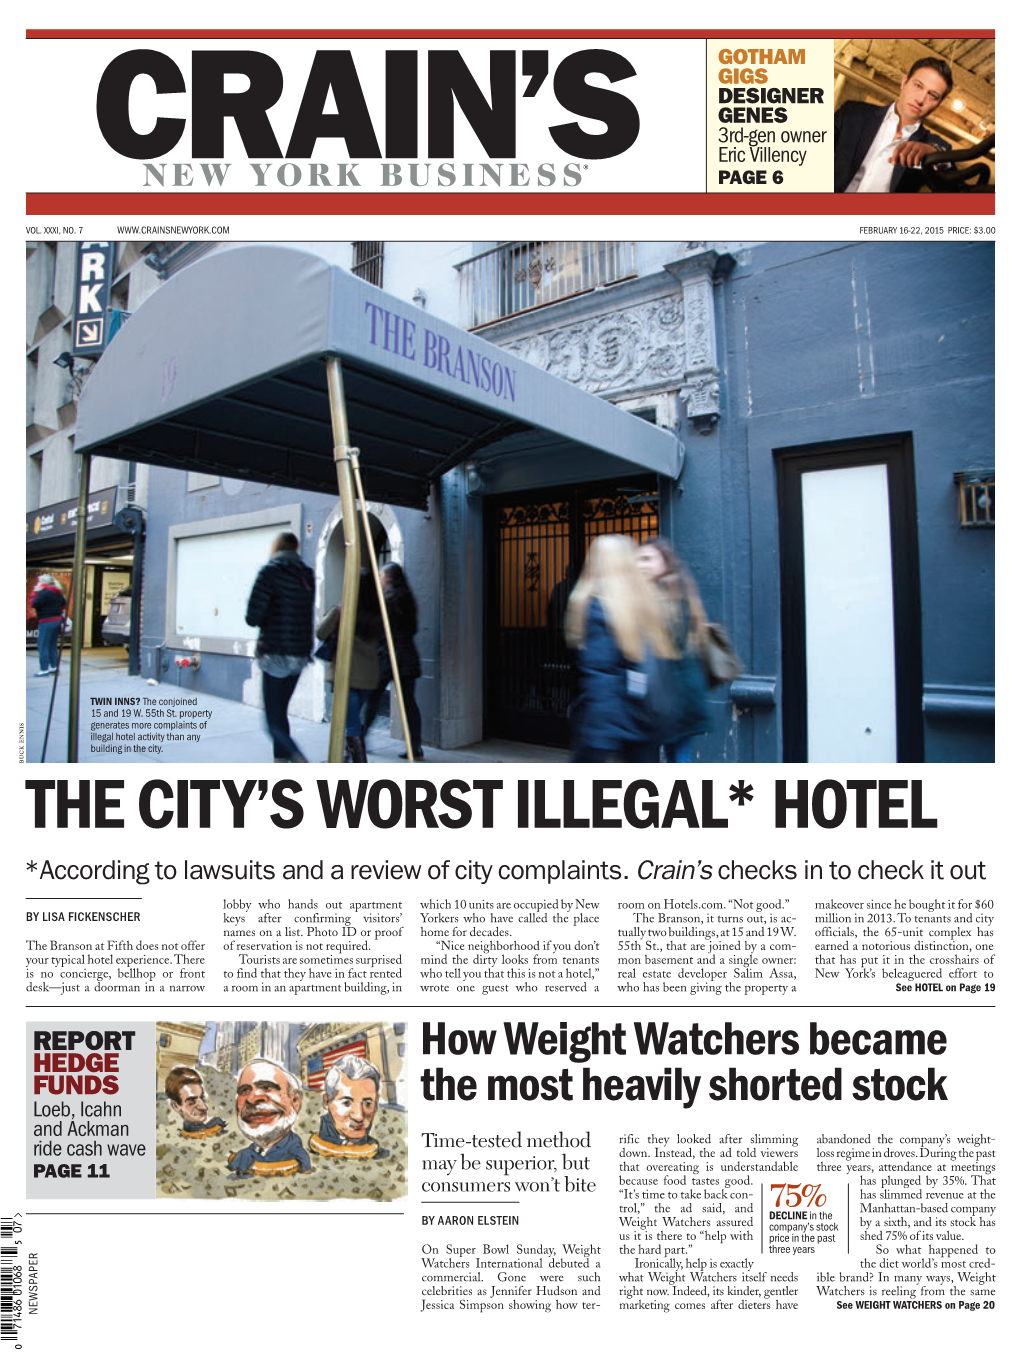 The City's Worst Illegal* Hotel